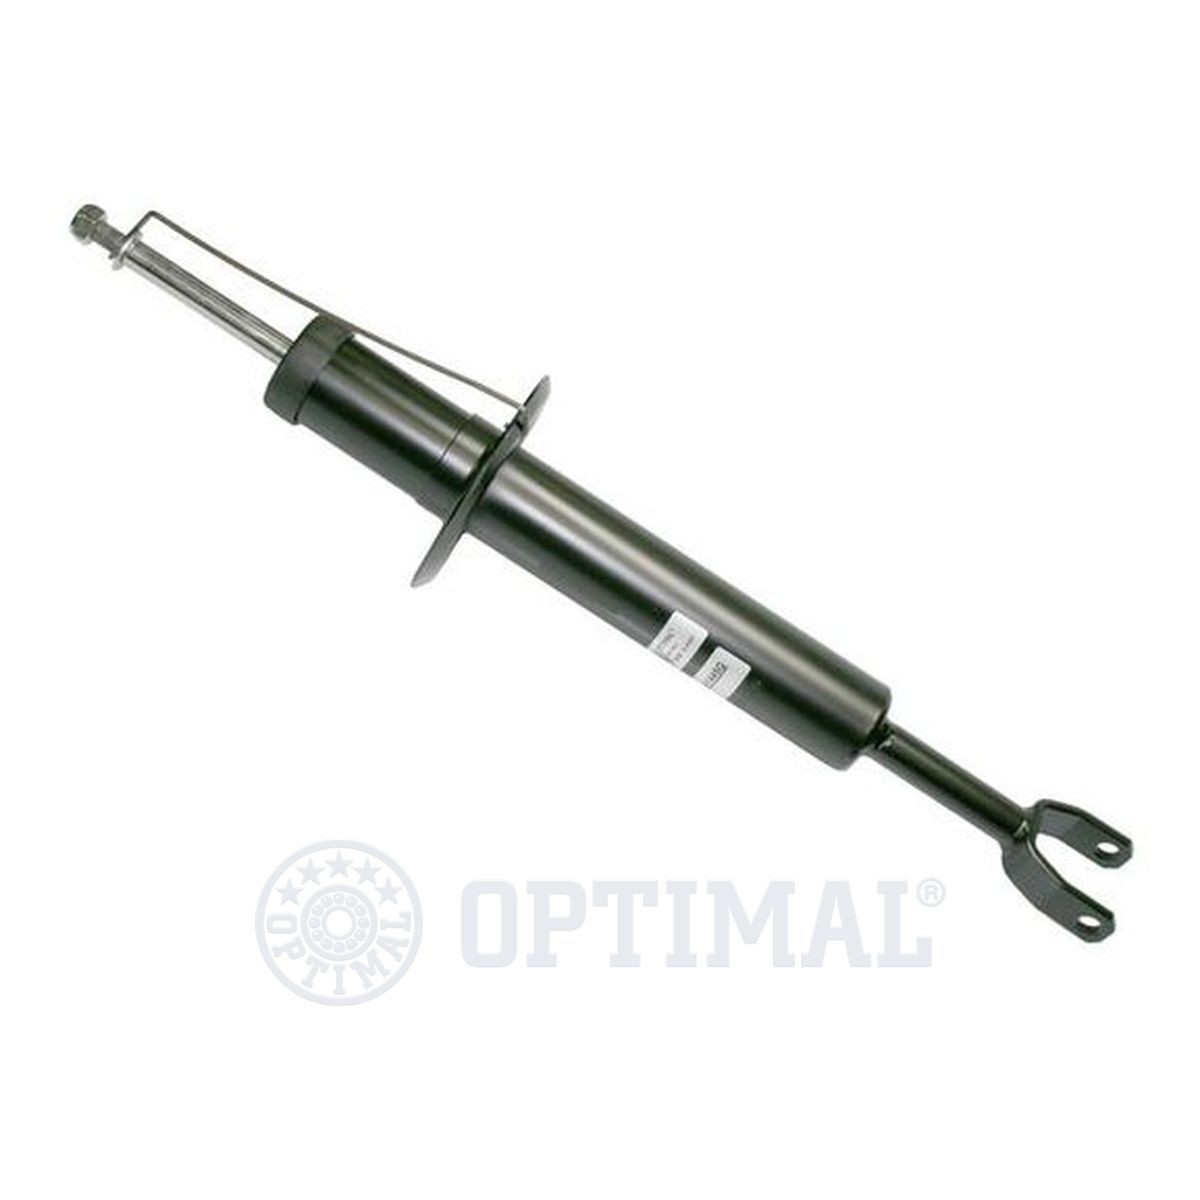 OPTIMAL A-1445G Shock absorber Front Axle, Gas Pressure, Twin-Tube, Spring-bearing Damper, Top pin, Bottom Fork, M12x1.5